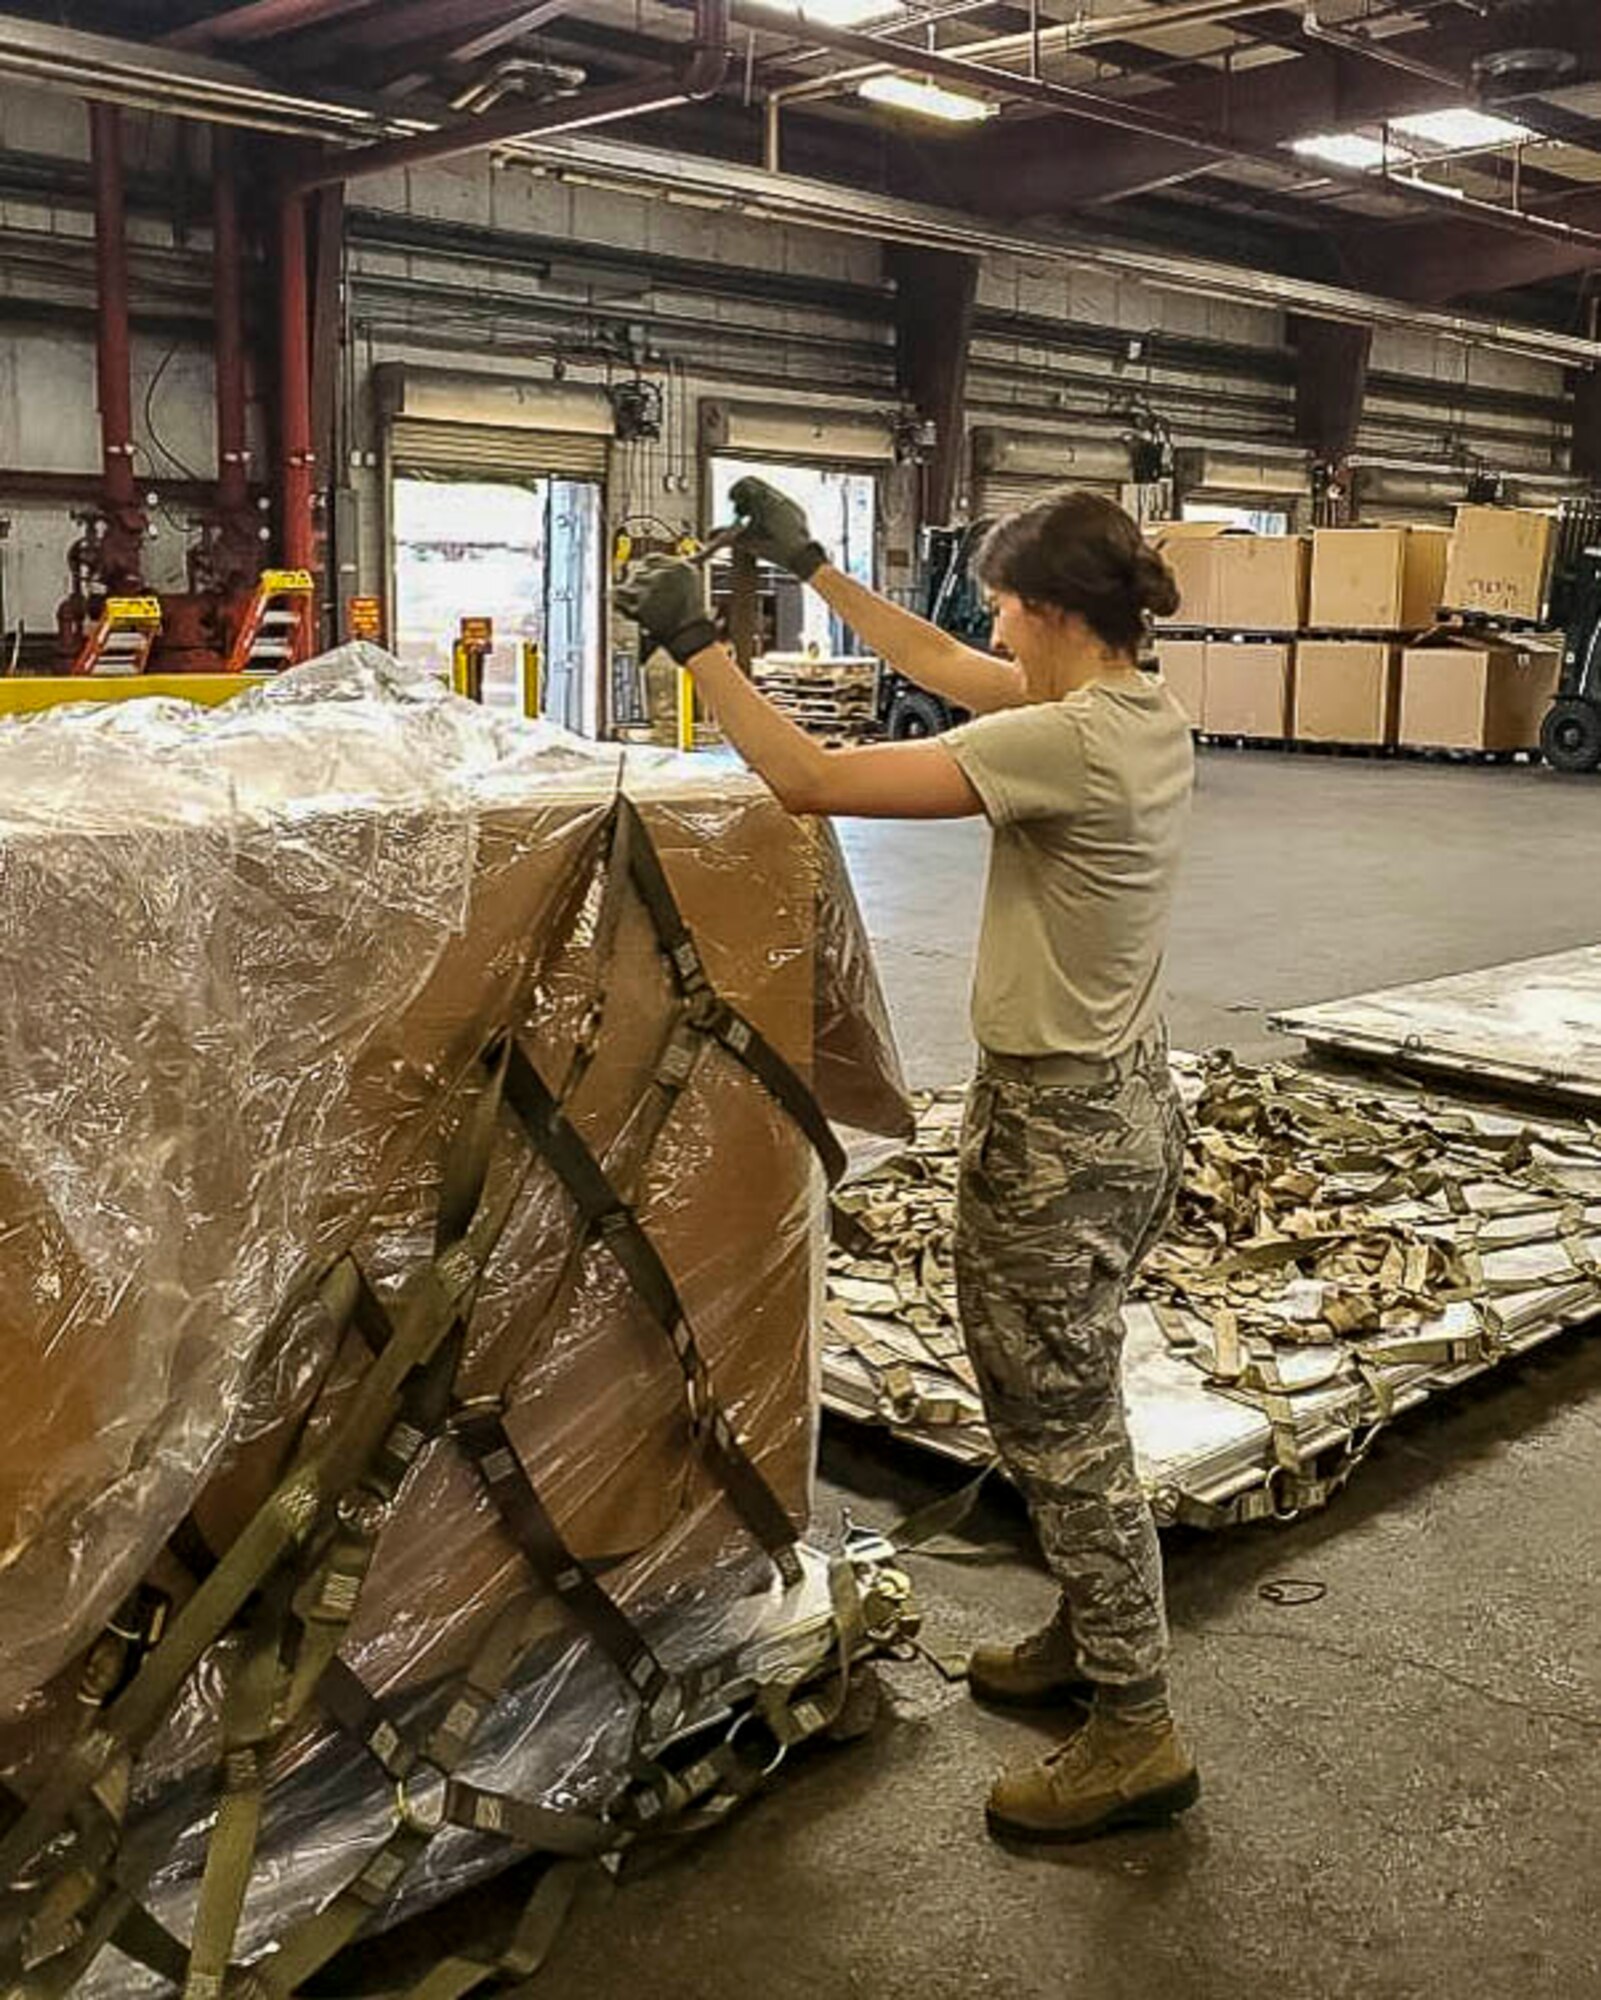 Senior Airman Hannah Gillespie, 96th Aerial Port Squadron air transportation specialist, prepares and palletizes cargo for shipment on June 30, 2018 at Norfolk, Va.  •	The majority of our Reserve members have to meet the same requirements of Active Duty personnel. This means they have to balance a fulltime civilian job or college studies while maintaining their military readiness. Traditional Reservists have one weekend a month, two weeks a year to fulfill training in order to prepare for real world missions and requirements, ensuring strategic depth and readiness. (Courtesy photo)